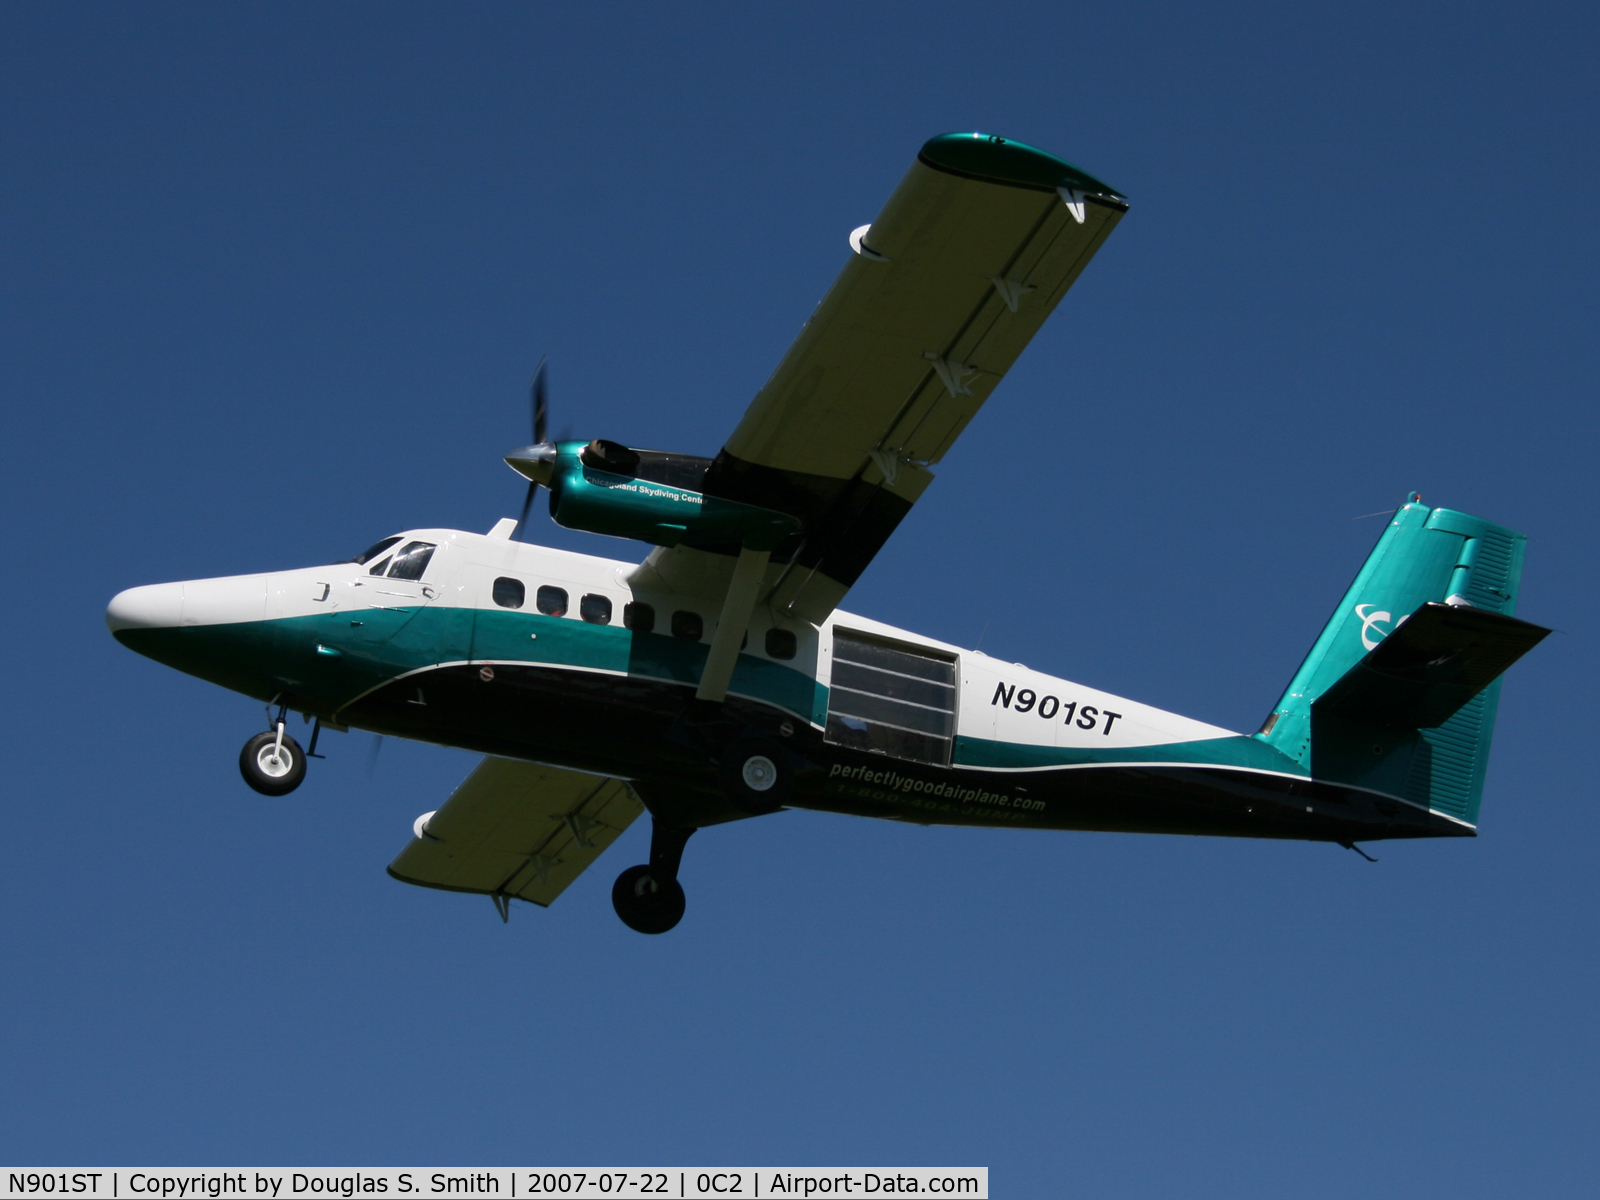 N901ST, 1969 De Havilland Canada DHC-6-200 Twin Otter C/N 208, Sierra Tango departing Hinckley Airfield with a load of jumpers